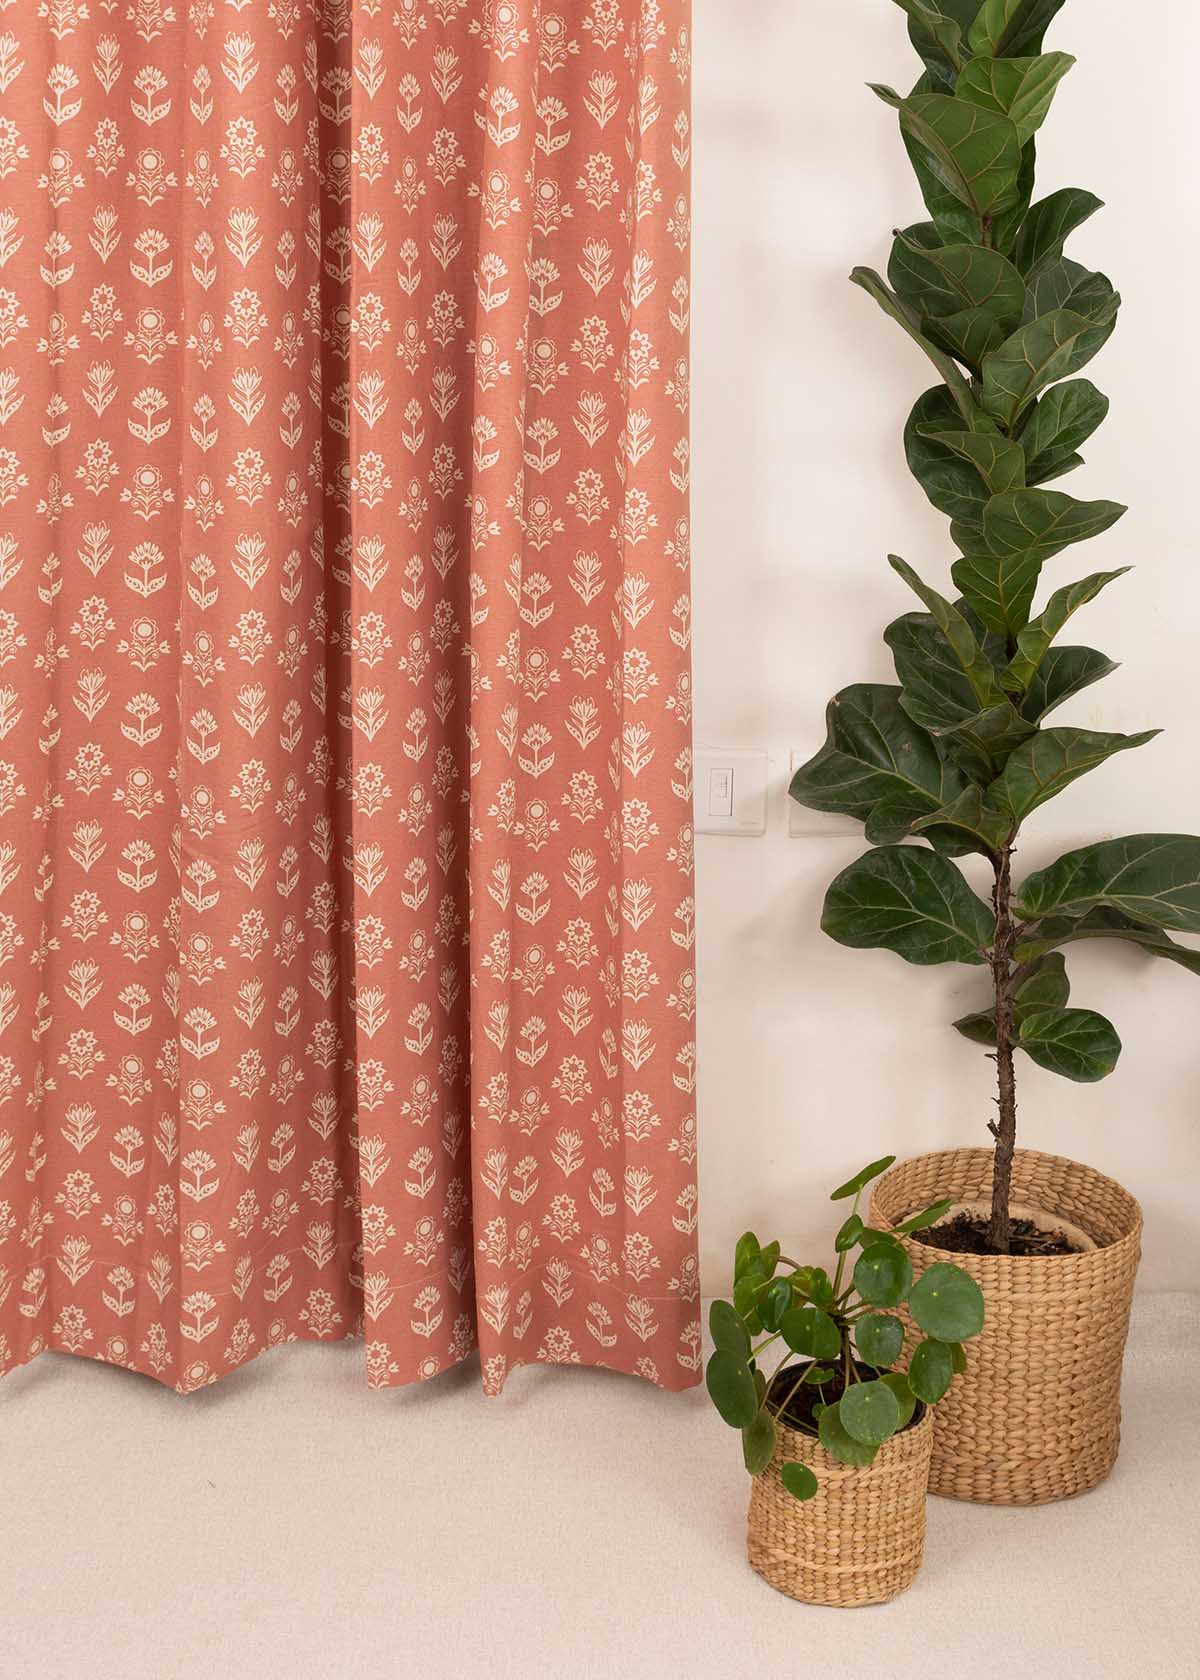 Dahlia 100% cotton floral curtain for living room - Room darkening - Rust - Pack of 1